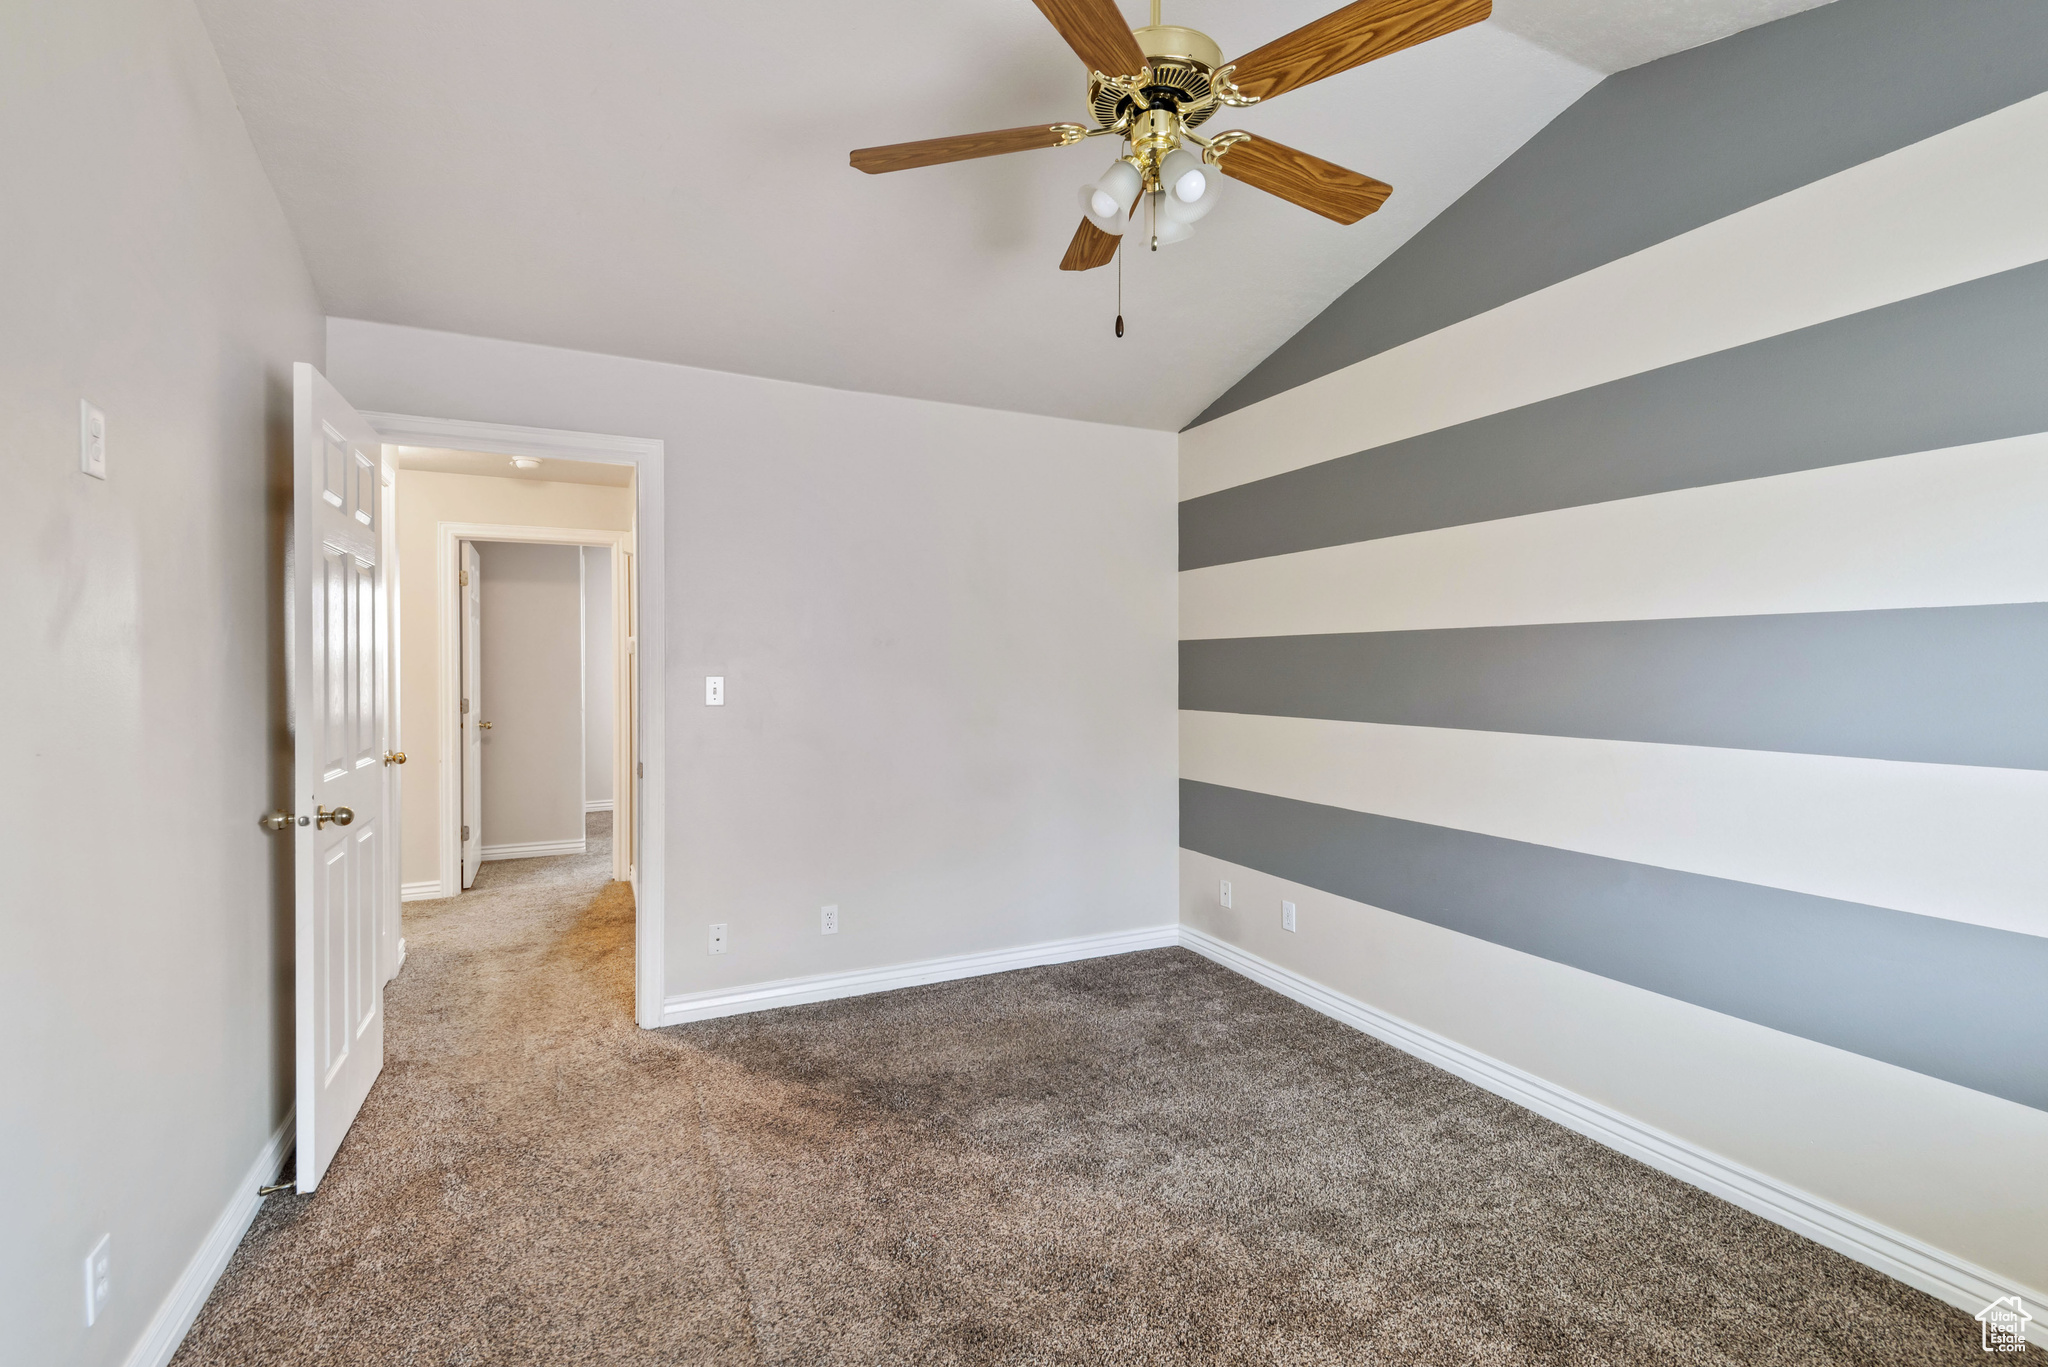 Empty room featuring dark carpet, ceiling fan, and lofted ceiling